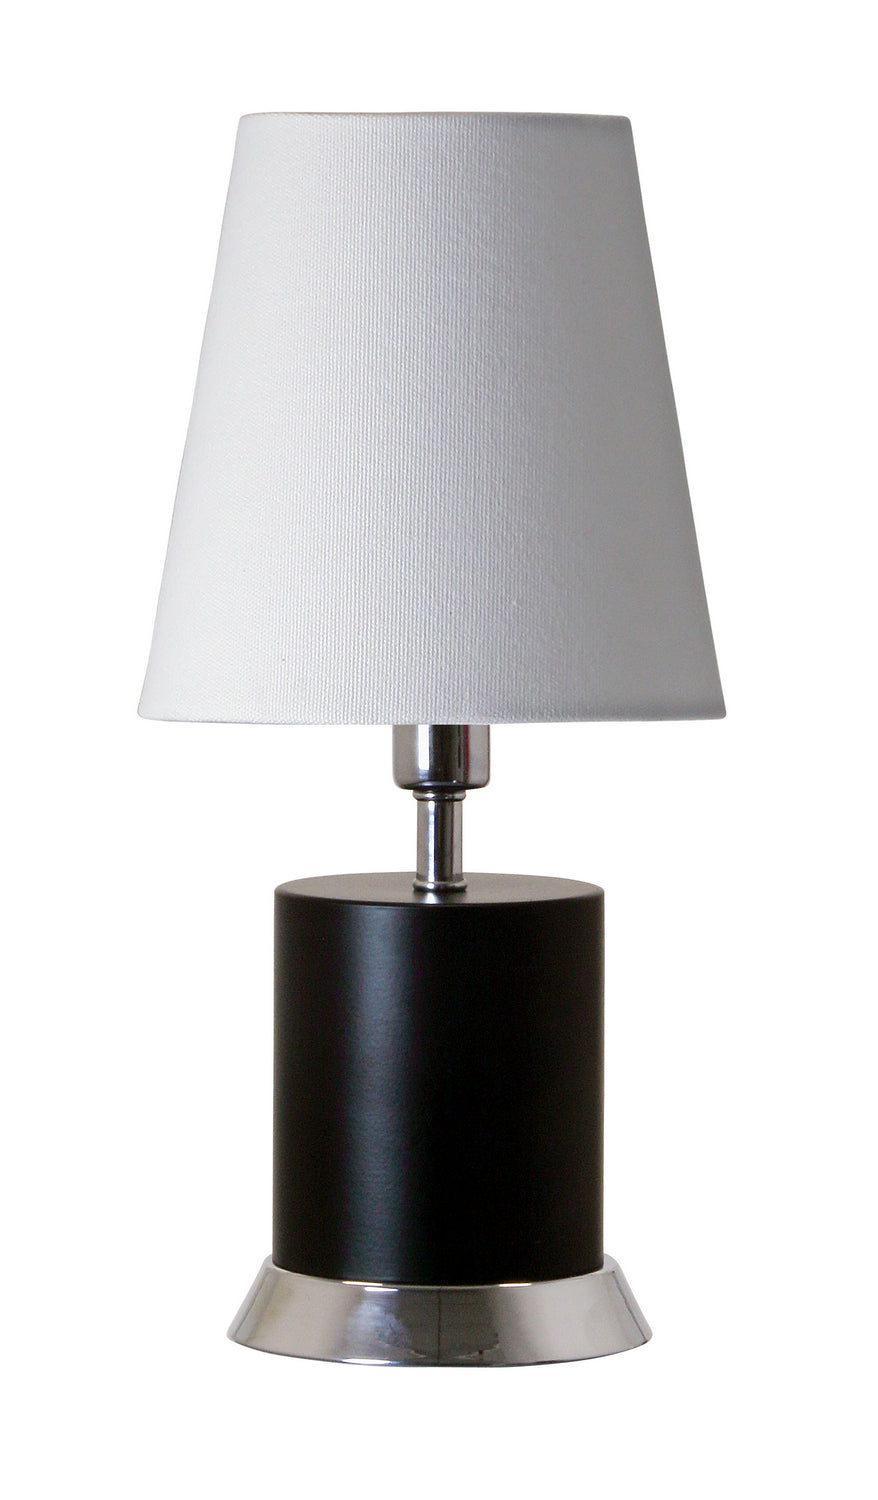 House of Troy - GEO310 - One Light Table Lamp - Geo - Black Matte With Chrome Accents